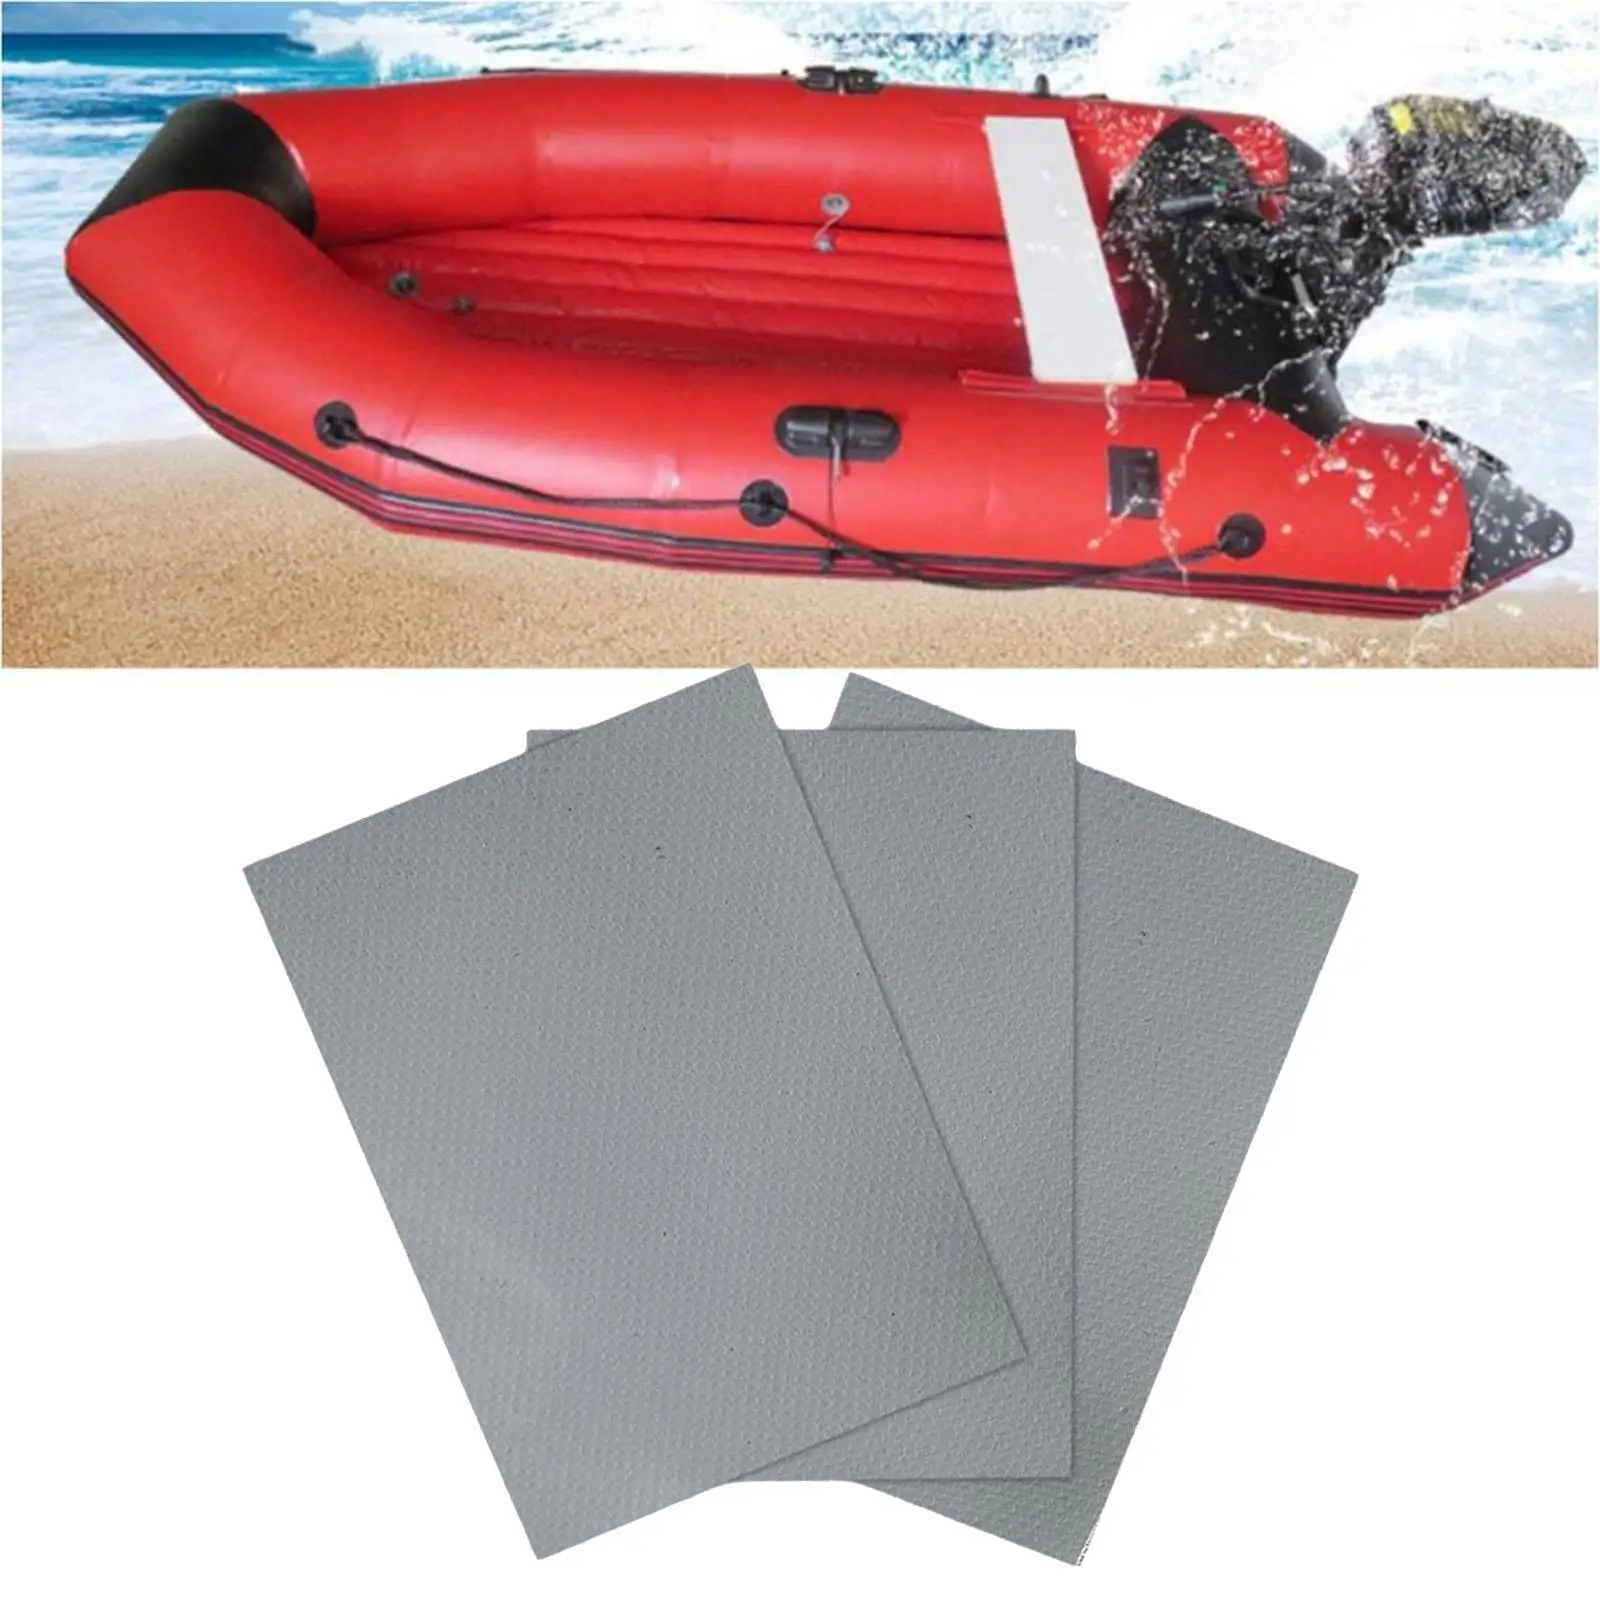 Details about   Inflatable Boats Kayak Dinghy Special Repair Patch Kit Glued PVC Patch 50*1000mm 